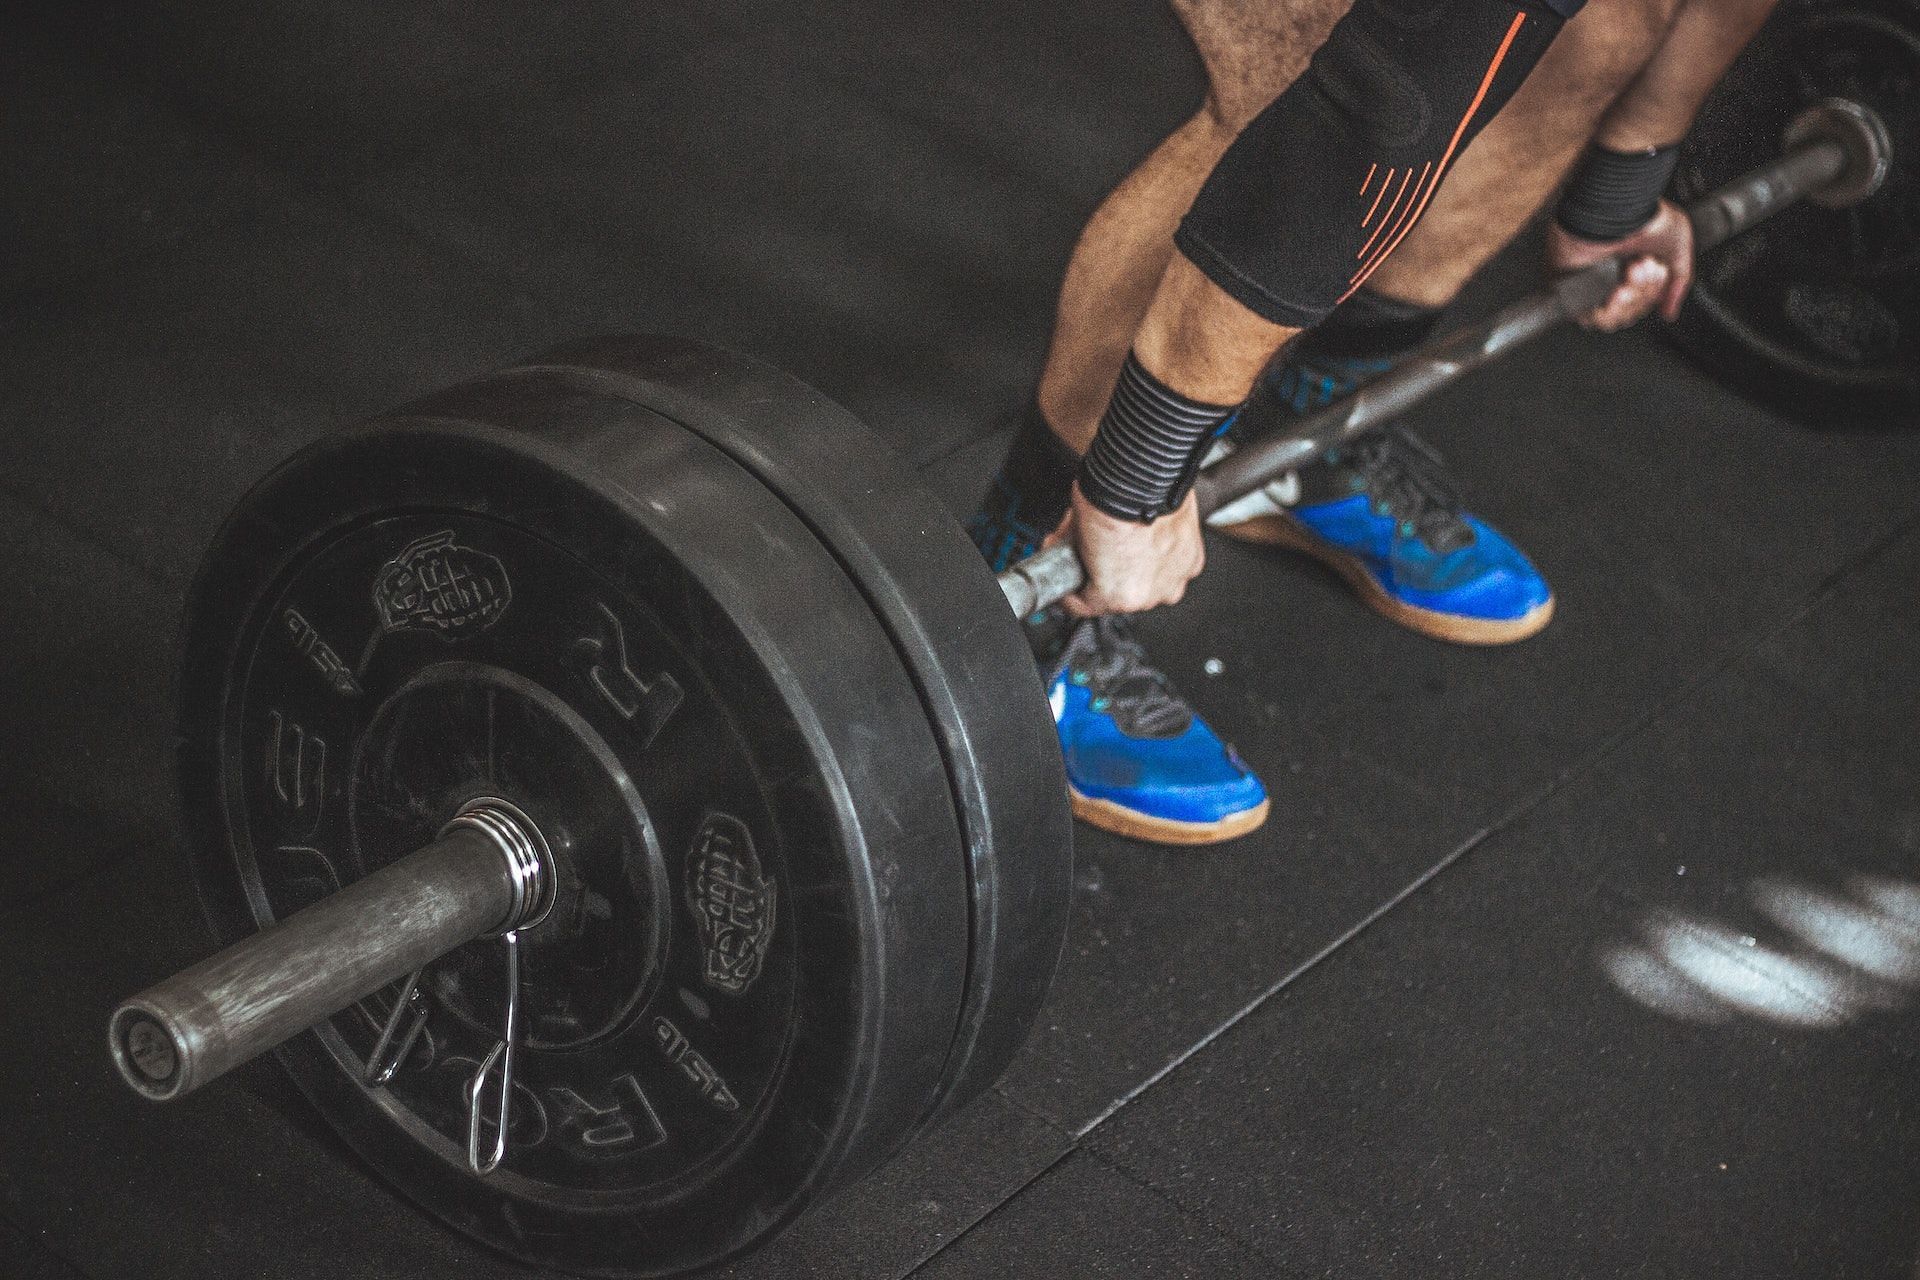 7 best compound exercises to build stronger thighs. (Image via Pexels/ Victor Freitas)